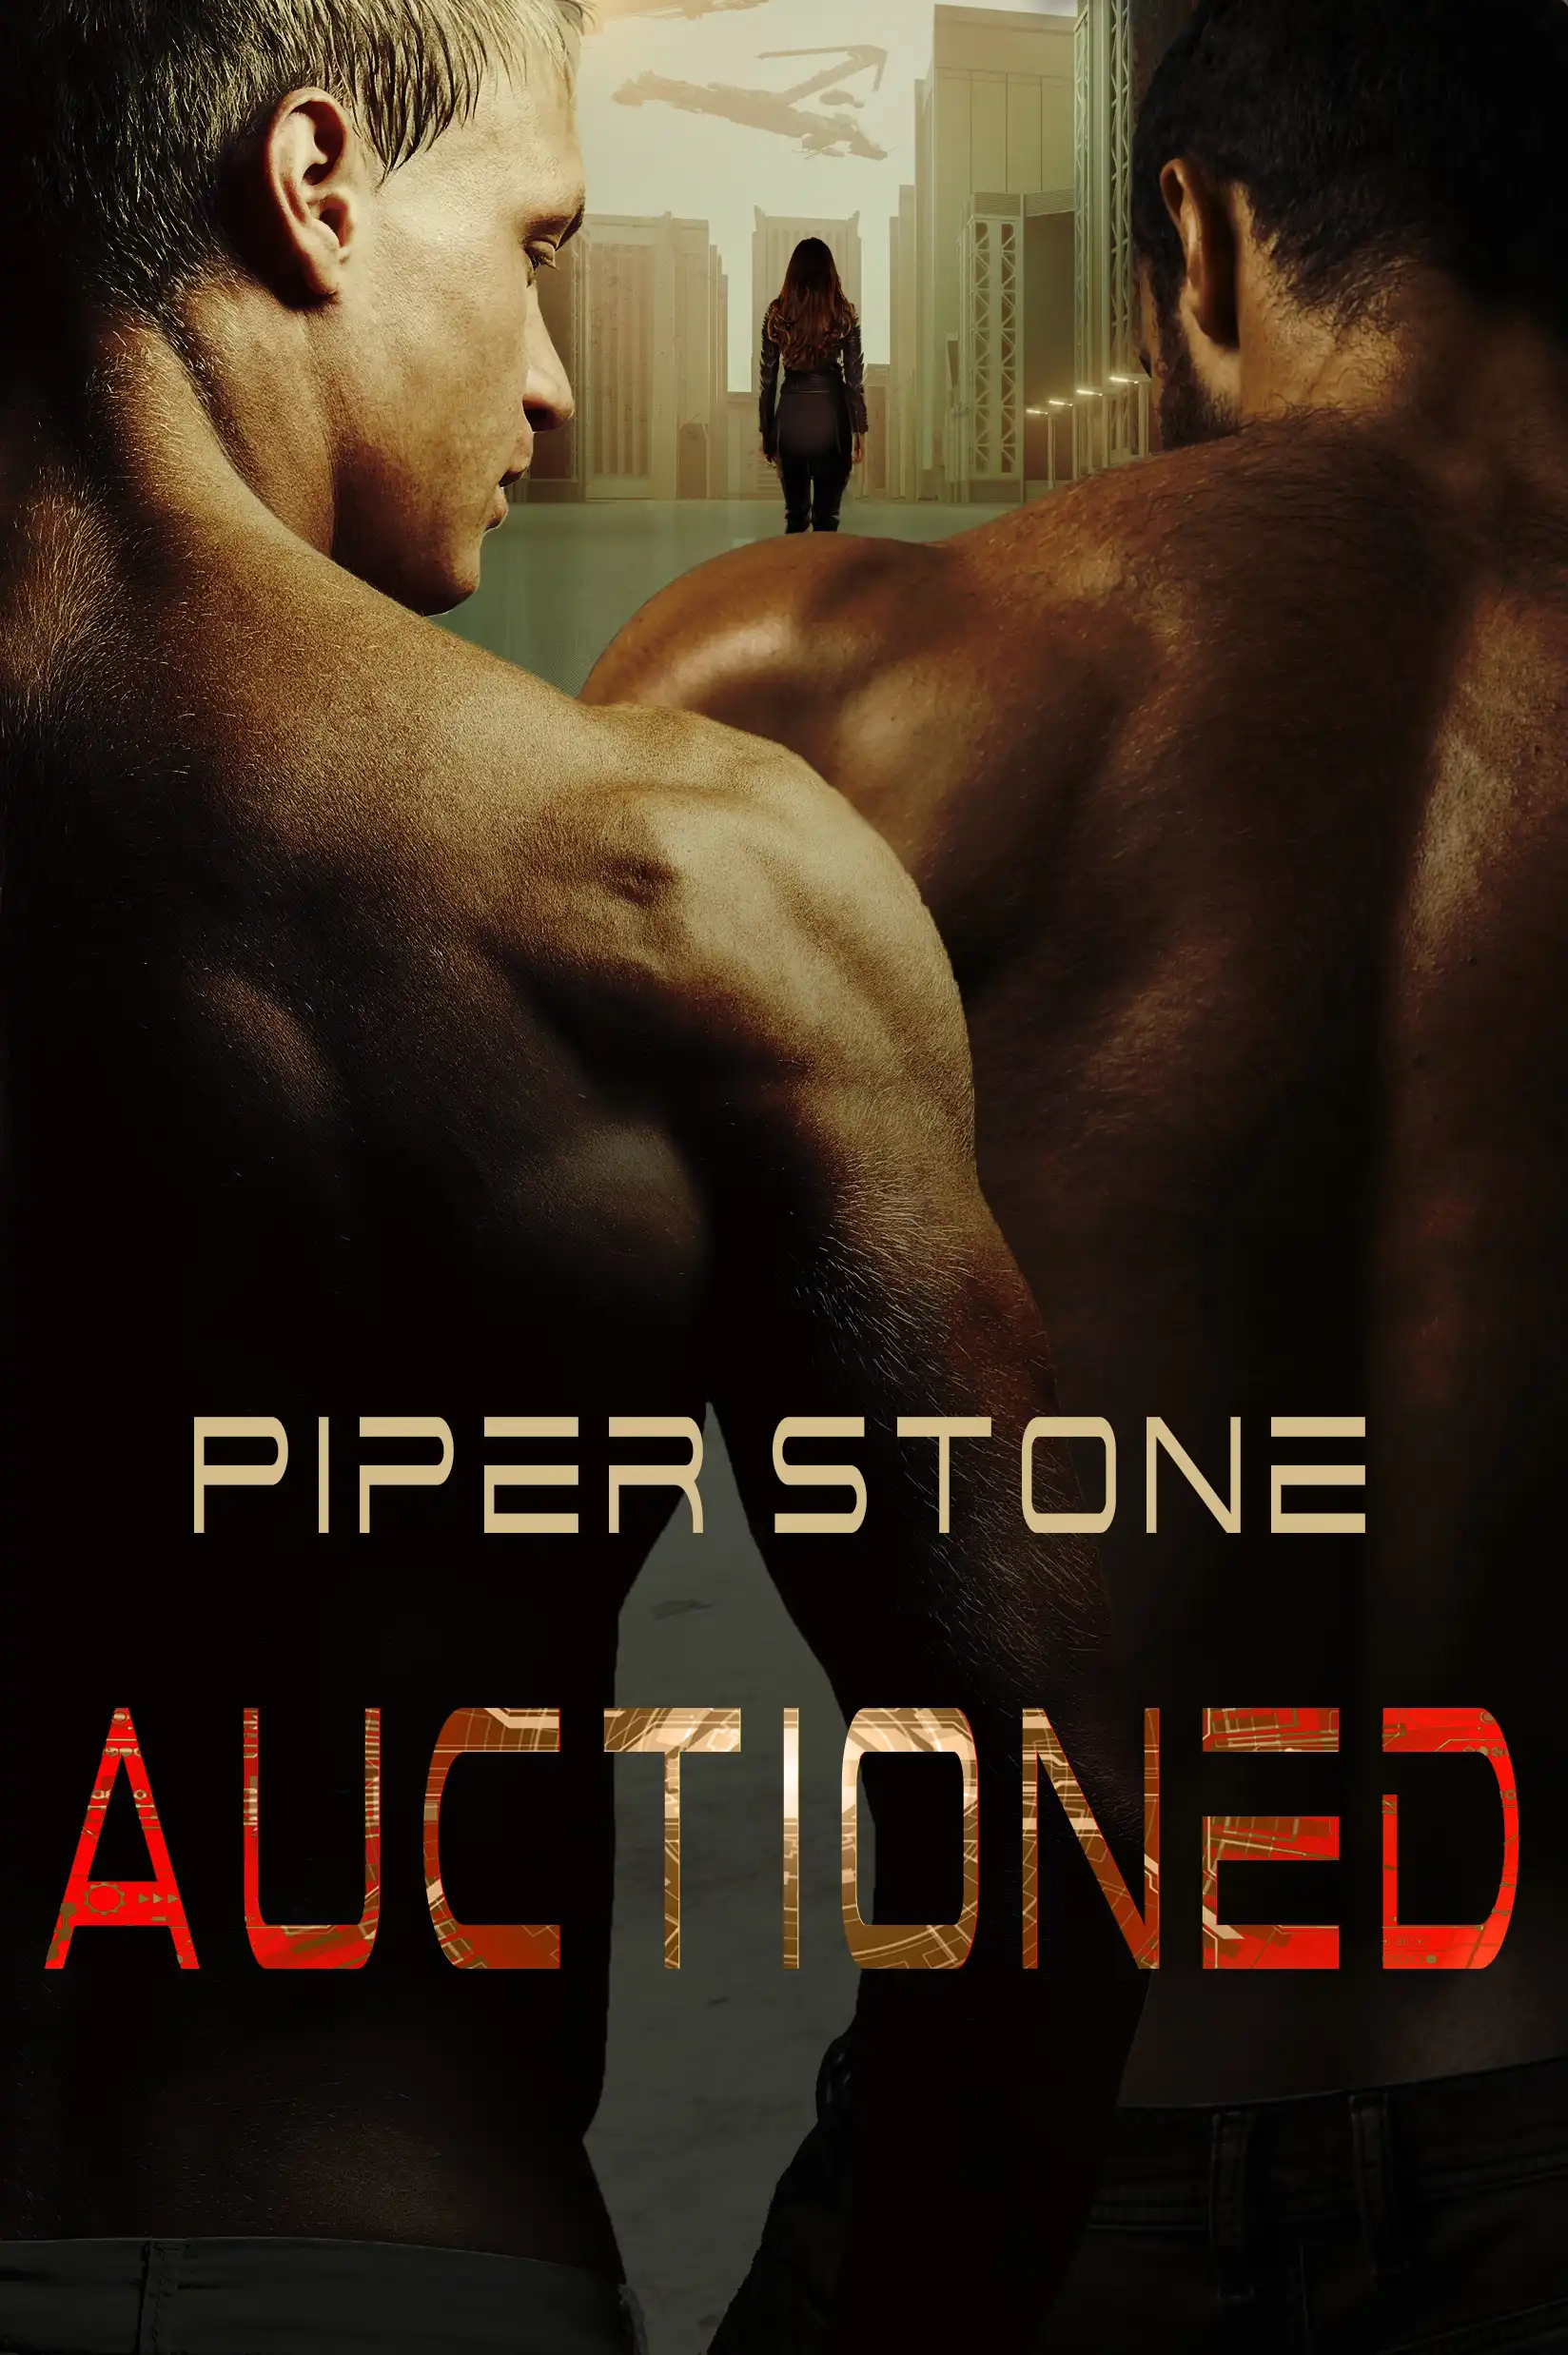 auctioned_full copy